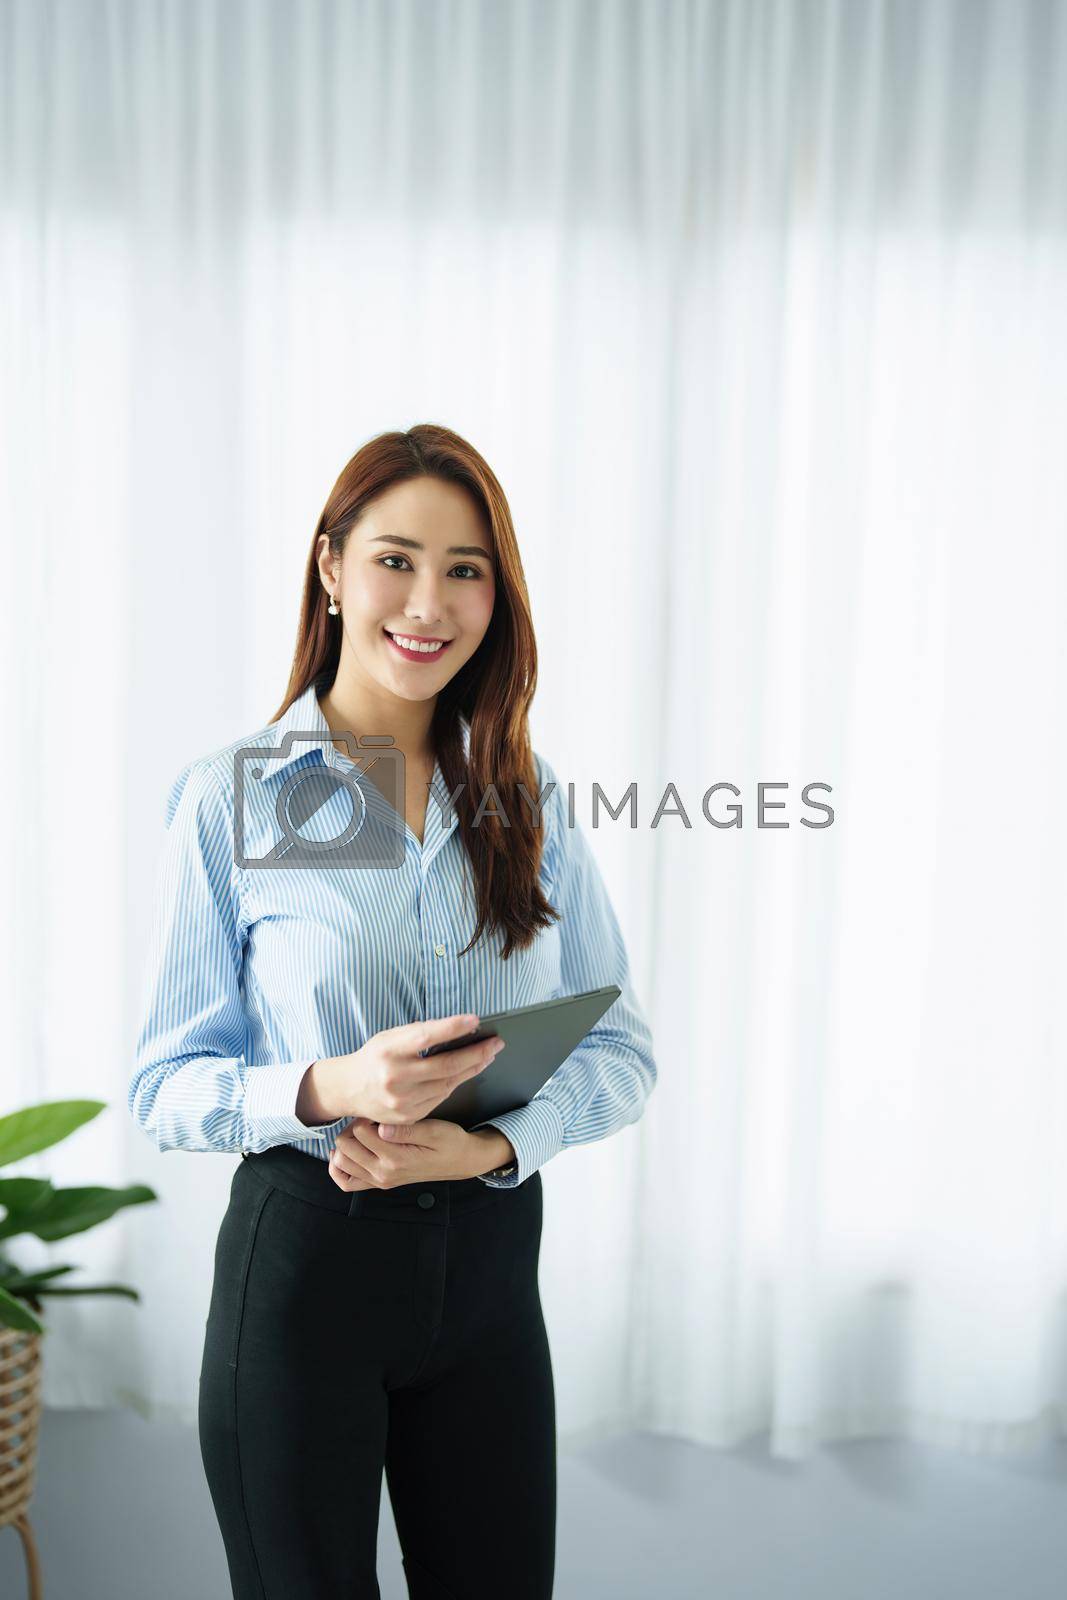 Royalty free image of Entrepreneur, Business Owner, Accountant, Portrait of Starting small businesses Asians holding a smiling tablet in the office. by Manastrong